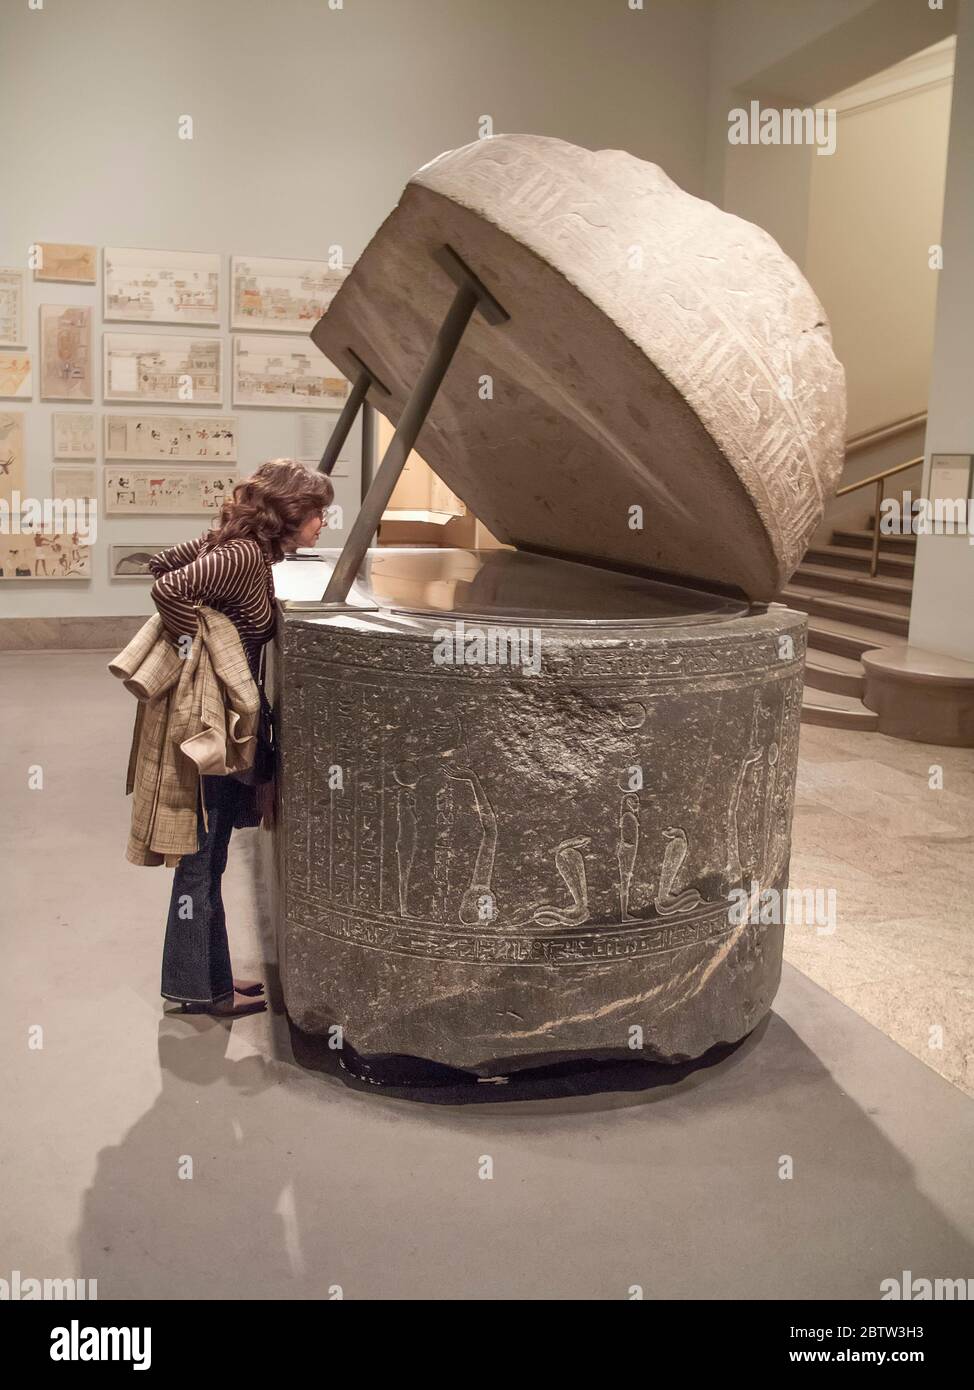 Woman looking inside an ancient Egyptian sarcophagus in the Metropolitan Museum of Art, New York, USA Stock Photo